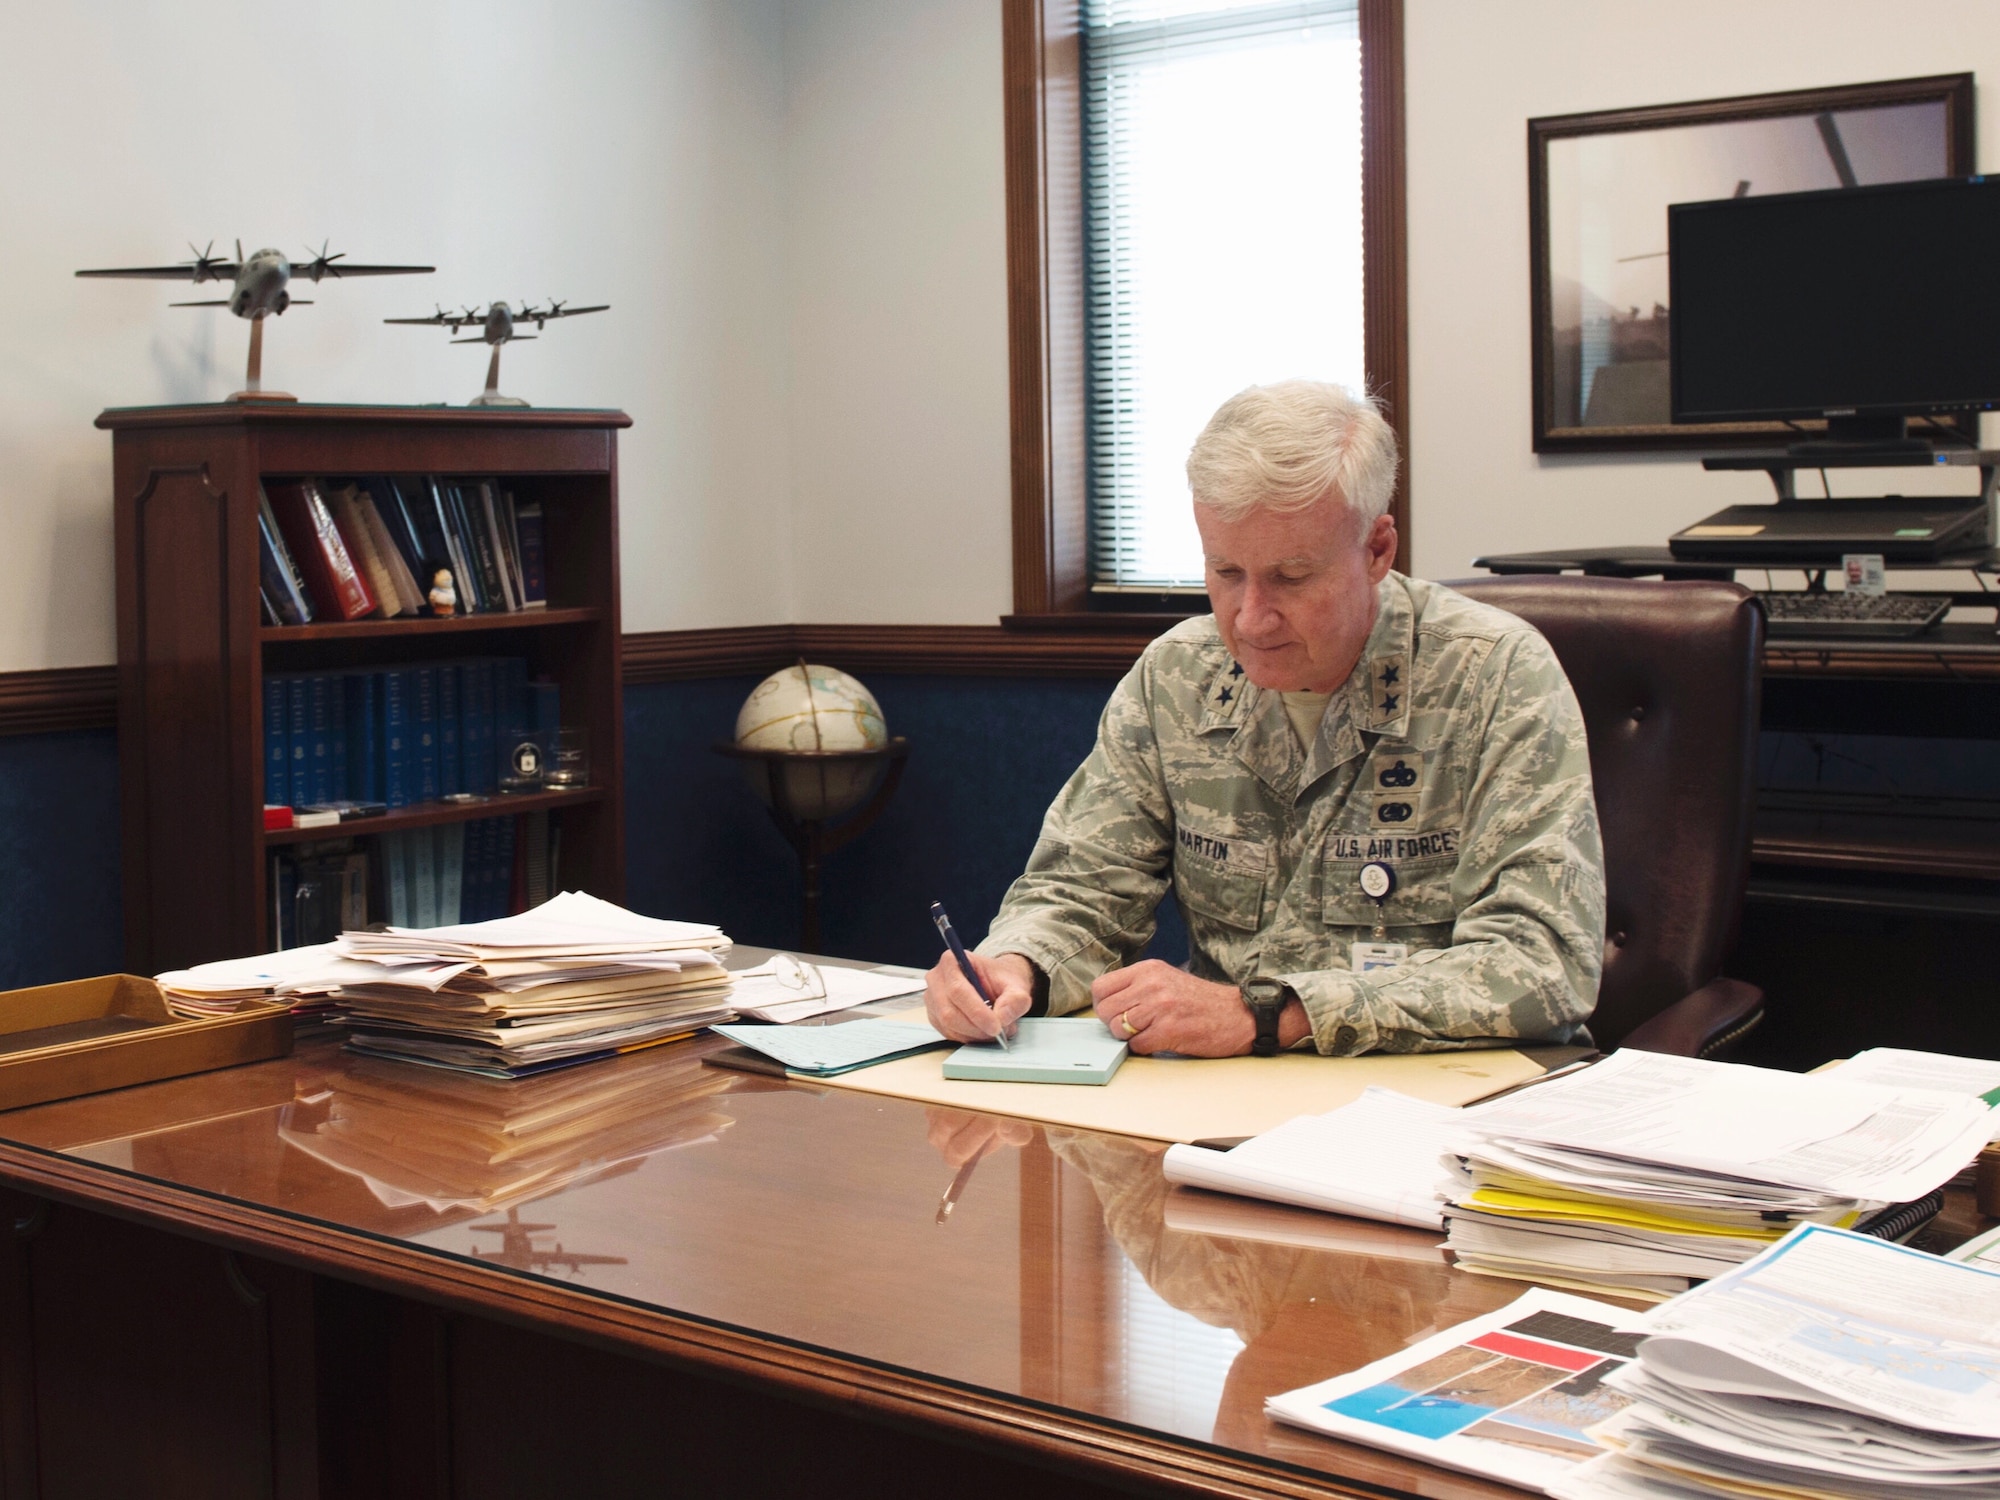 Maj. Gen. Thaddeus Martin works at his desk during his last week as the Connecticut National Guard The Adjutant General (TAG), June 27, 2018 in Hartford, Conn. He led the state for the past 13 years, and relinquished his command July 7, 2018. (U.S. Air National Guard photo by 1st Lt. Jen Pierce)